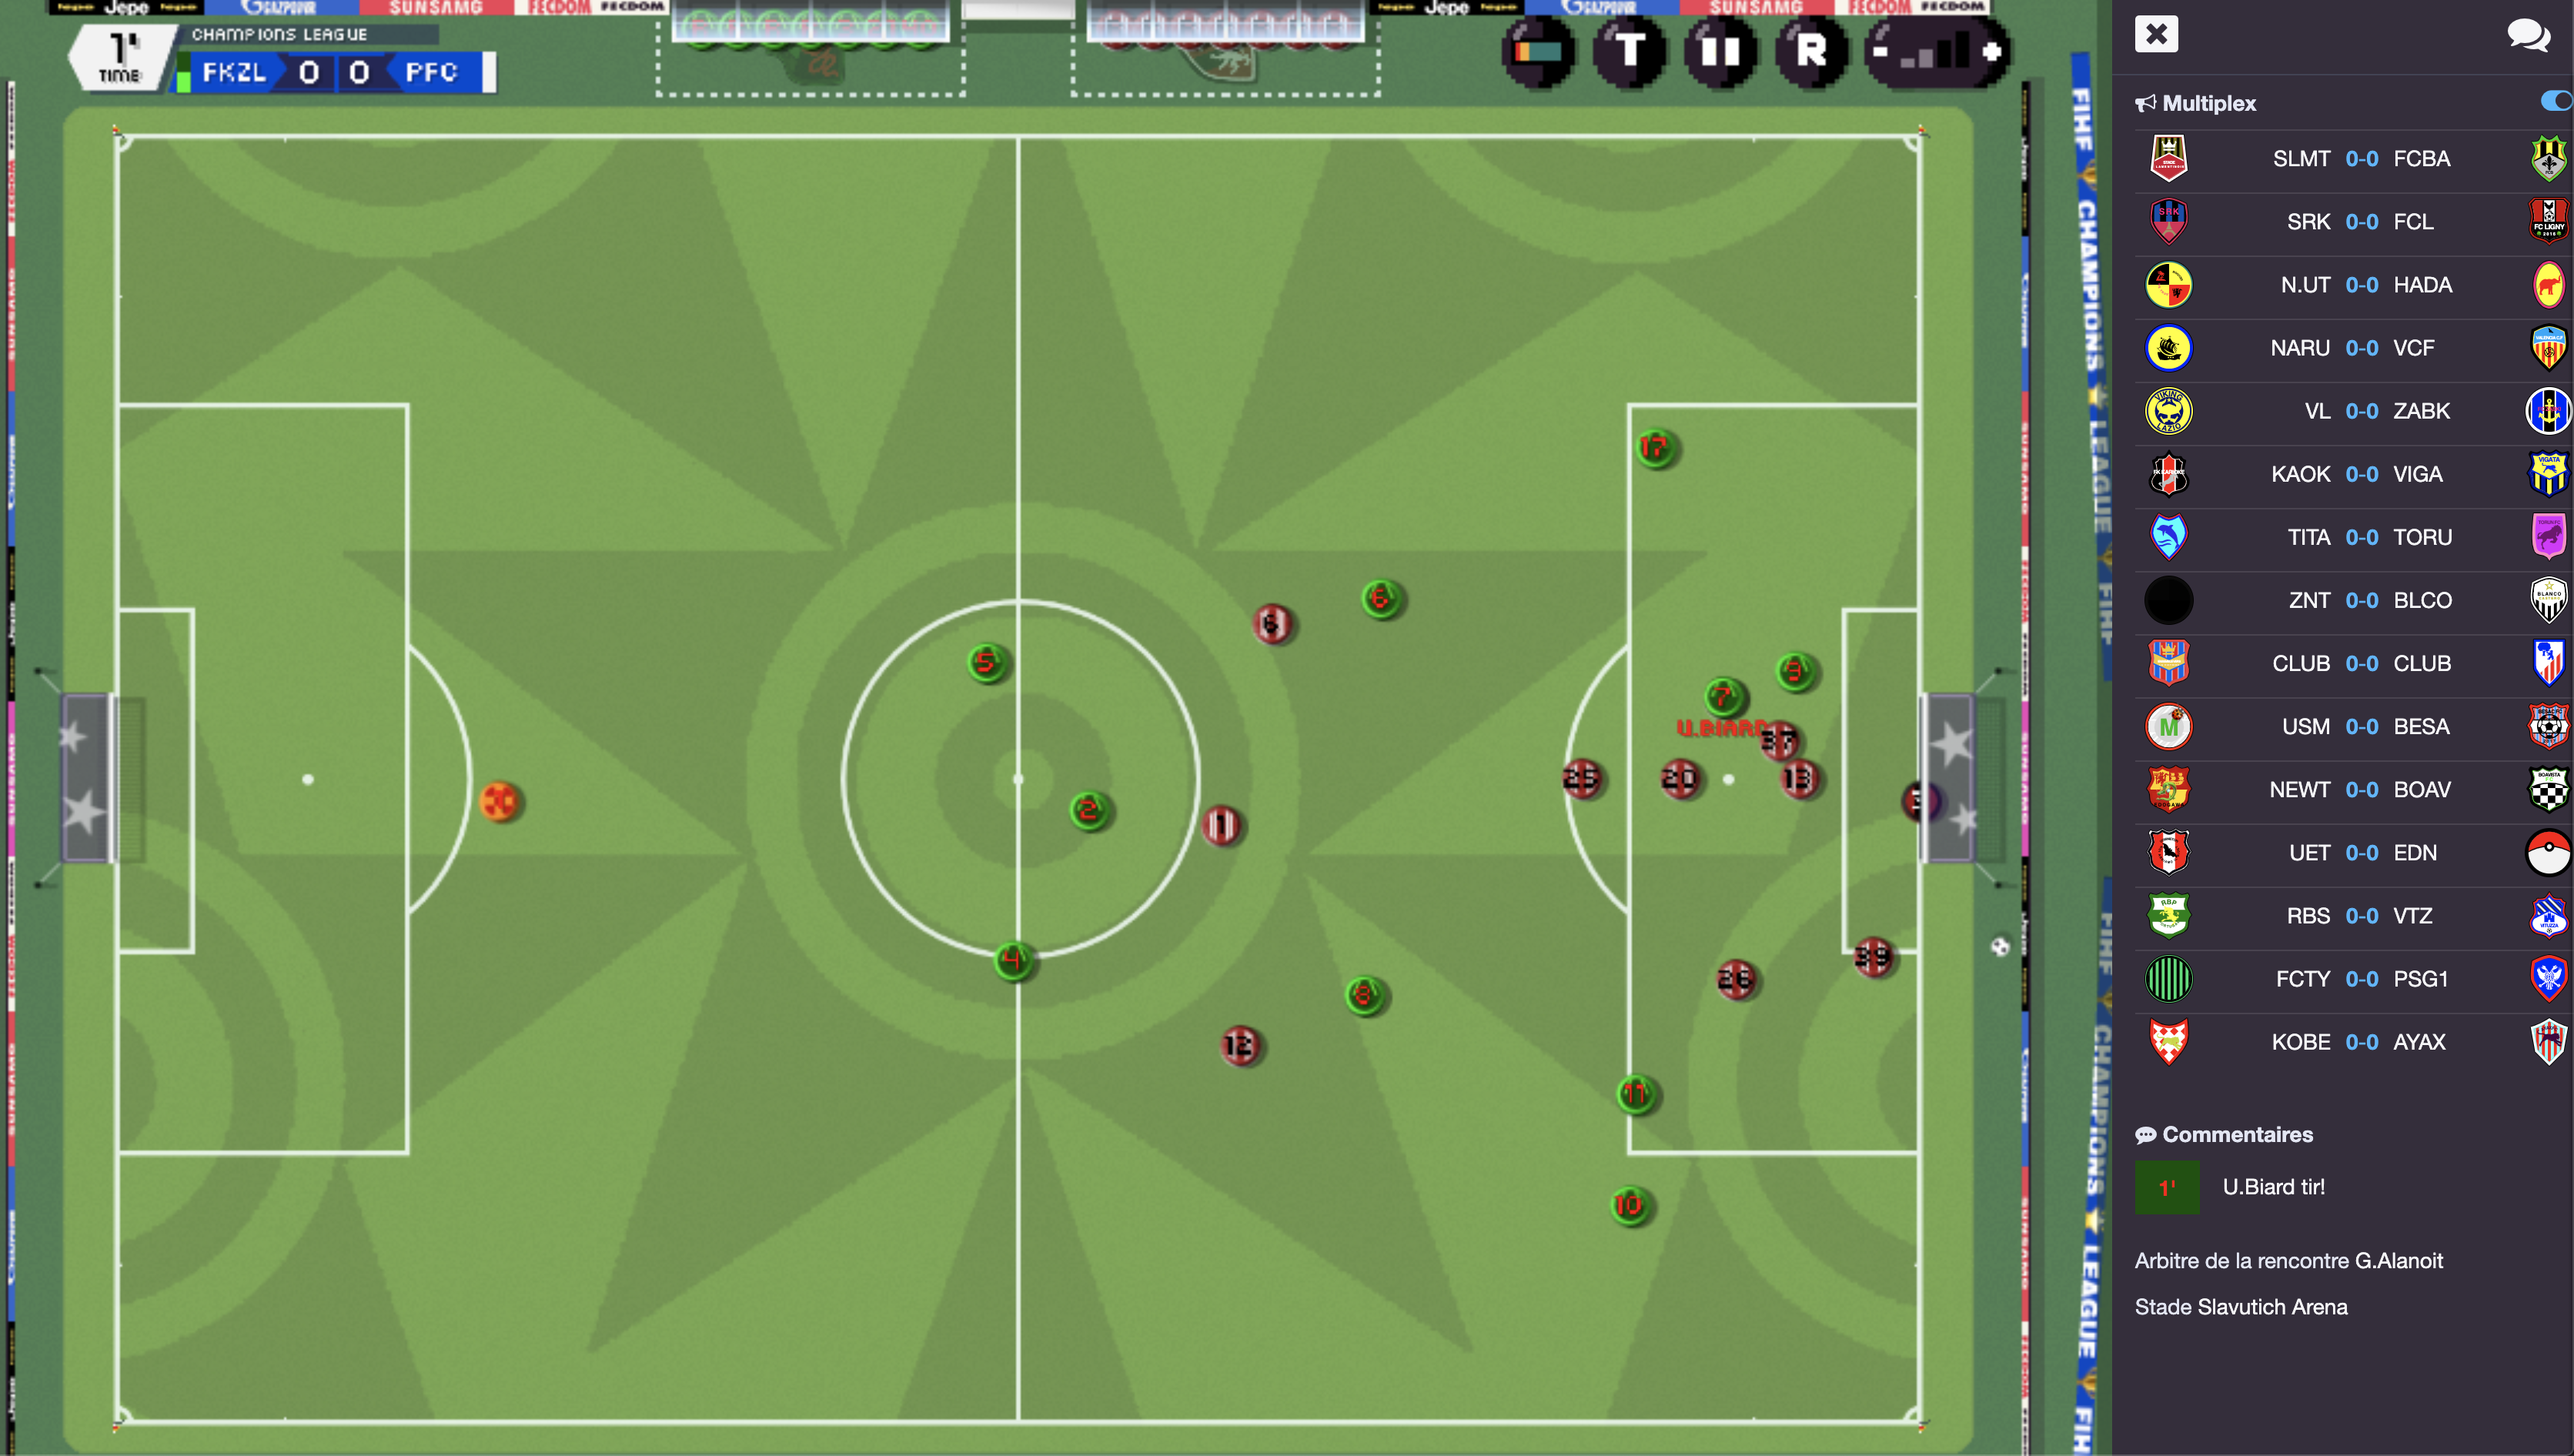 game view 4 image - Hourra Manager Football Online